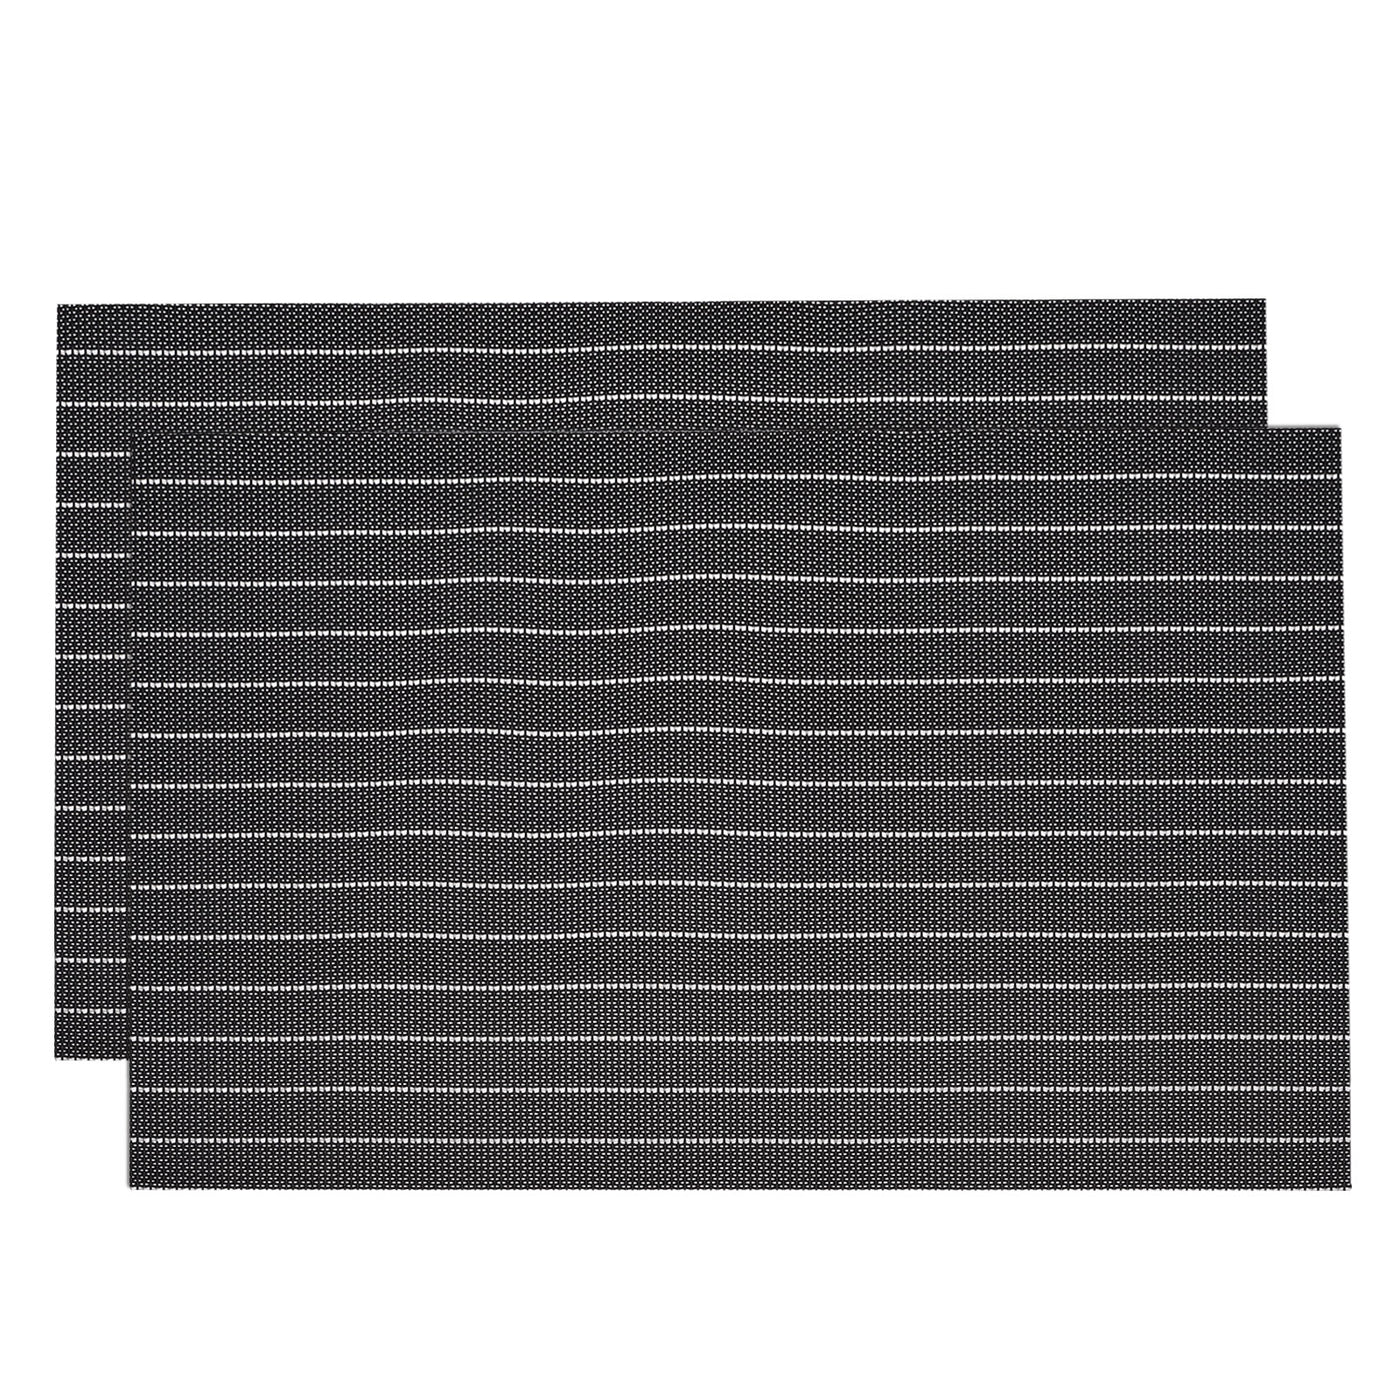 uxcell Uxcell Place Mats, 450x300mm Table Mats Set of 2 PVC Washable Woven Placemat Black